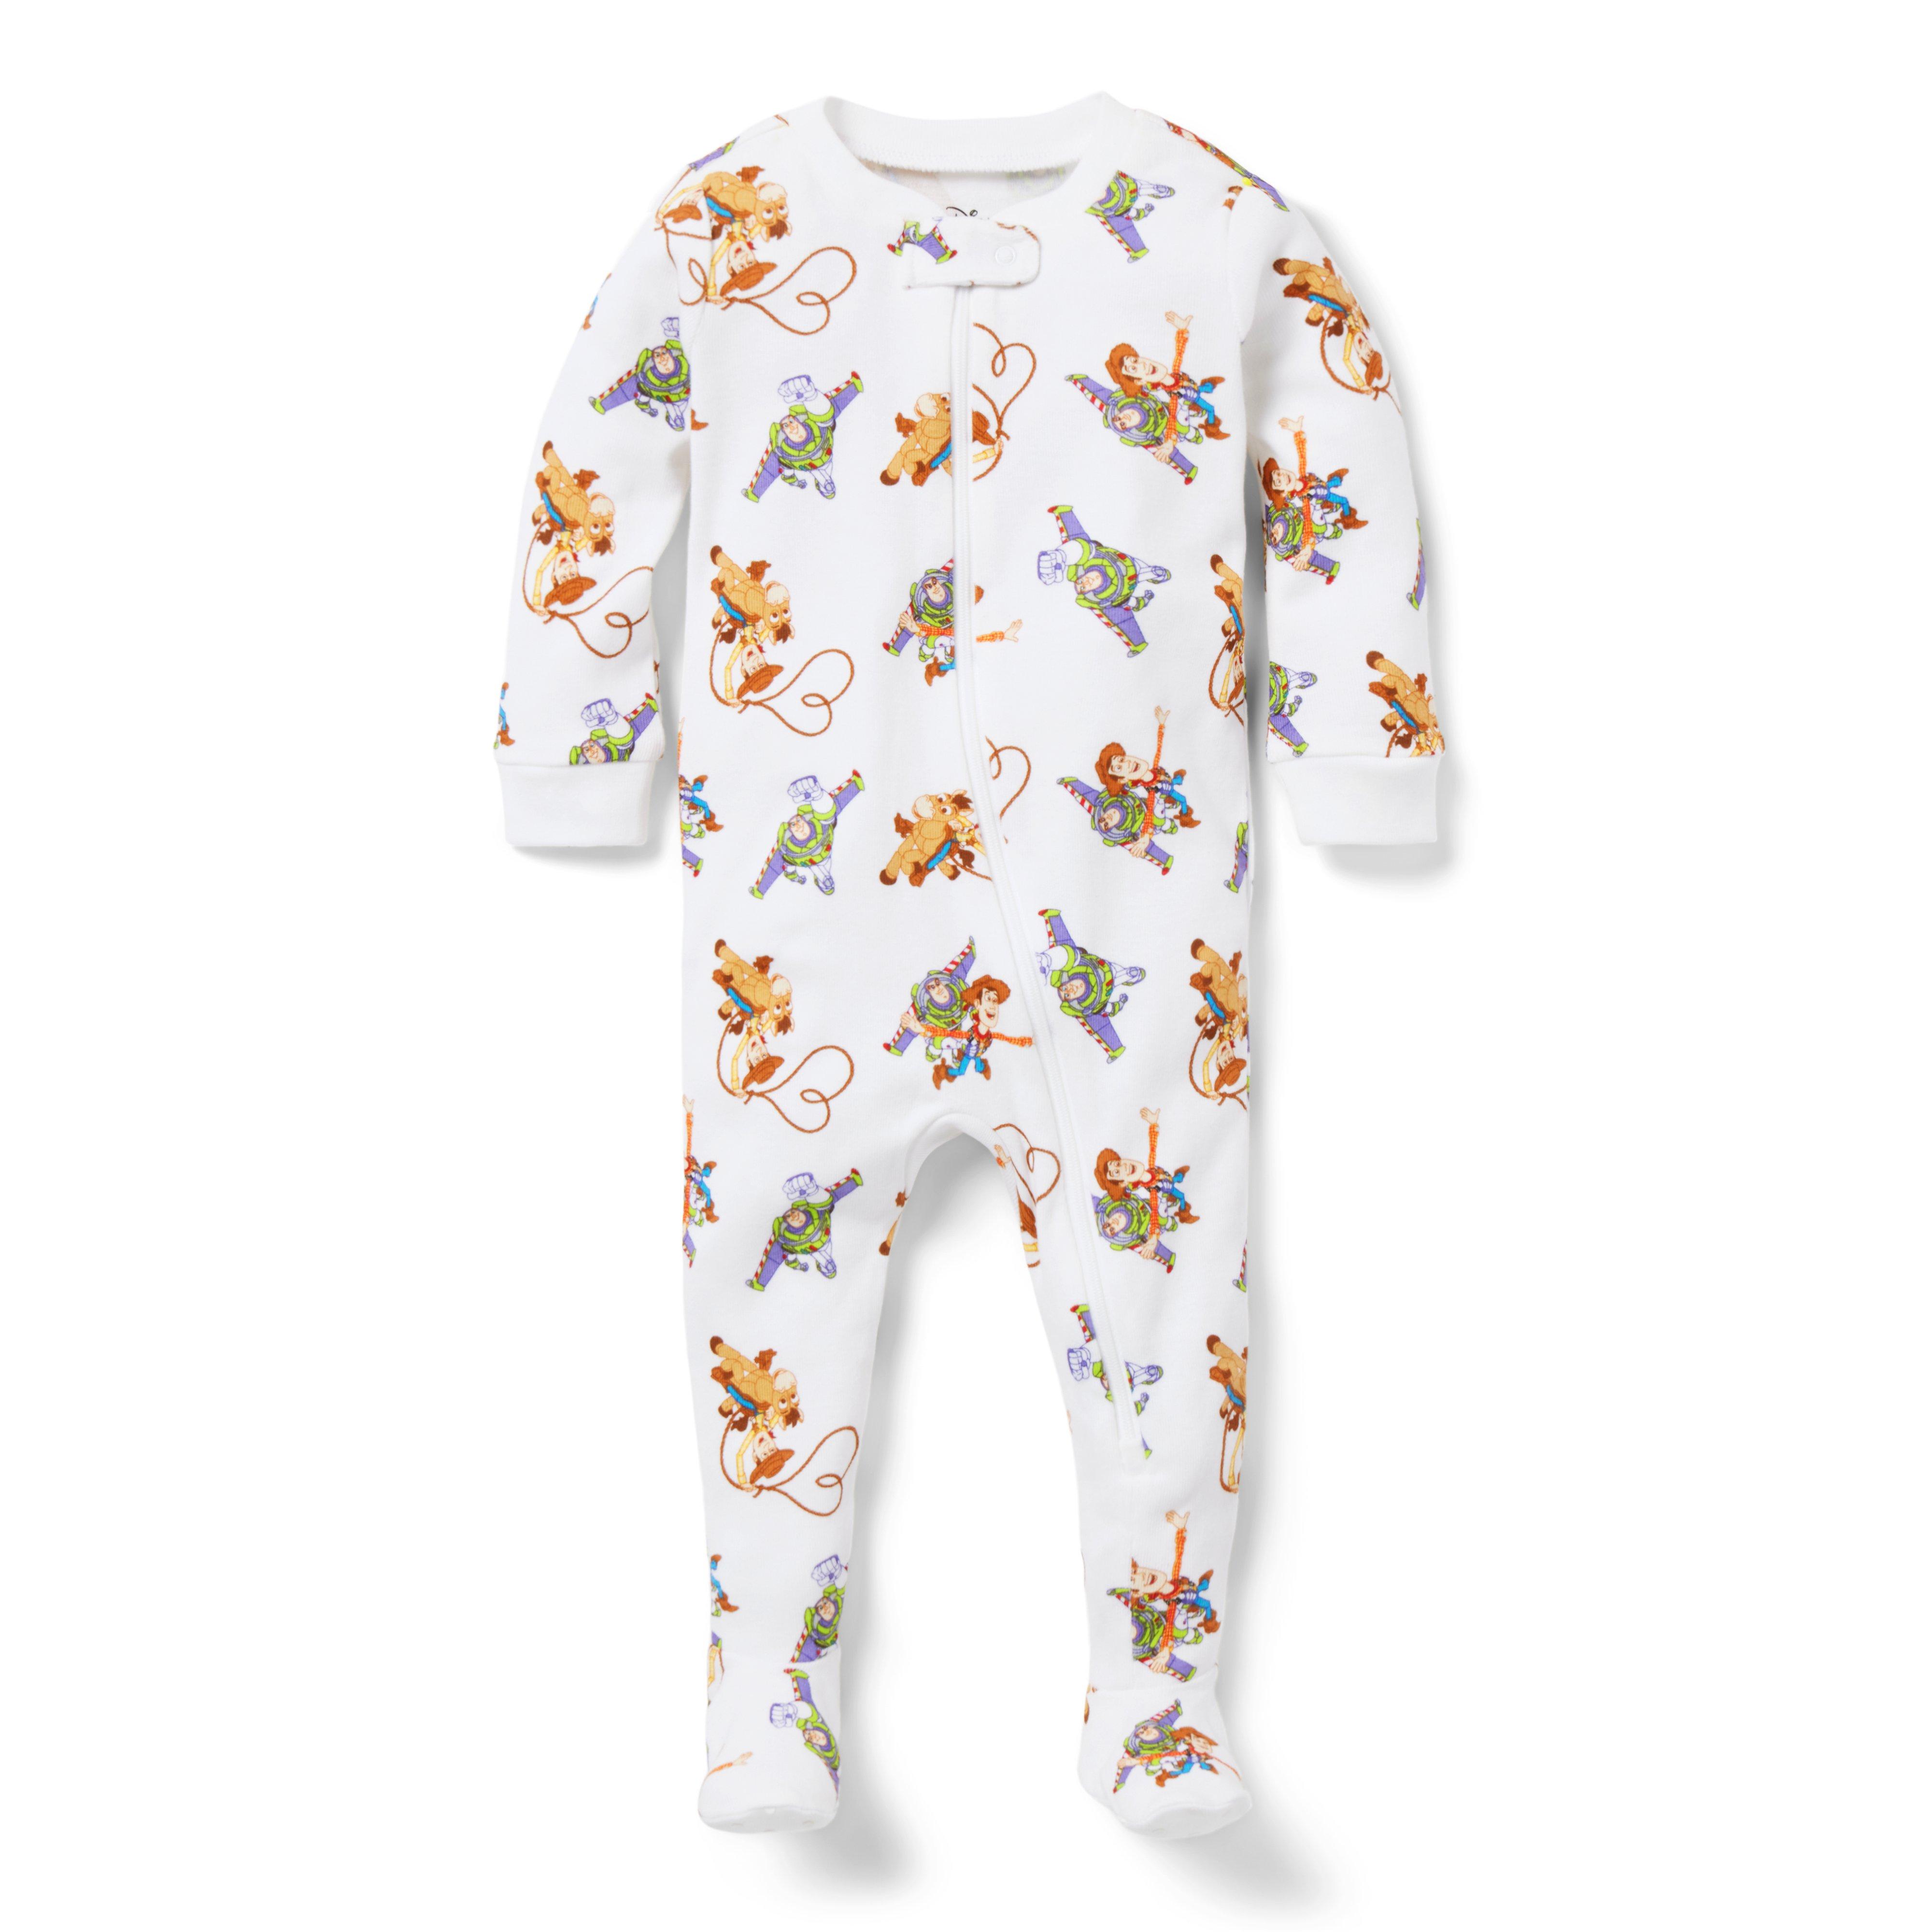 Baby Good Night Footed Pajama in Disney Toy Story image number 0